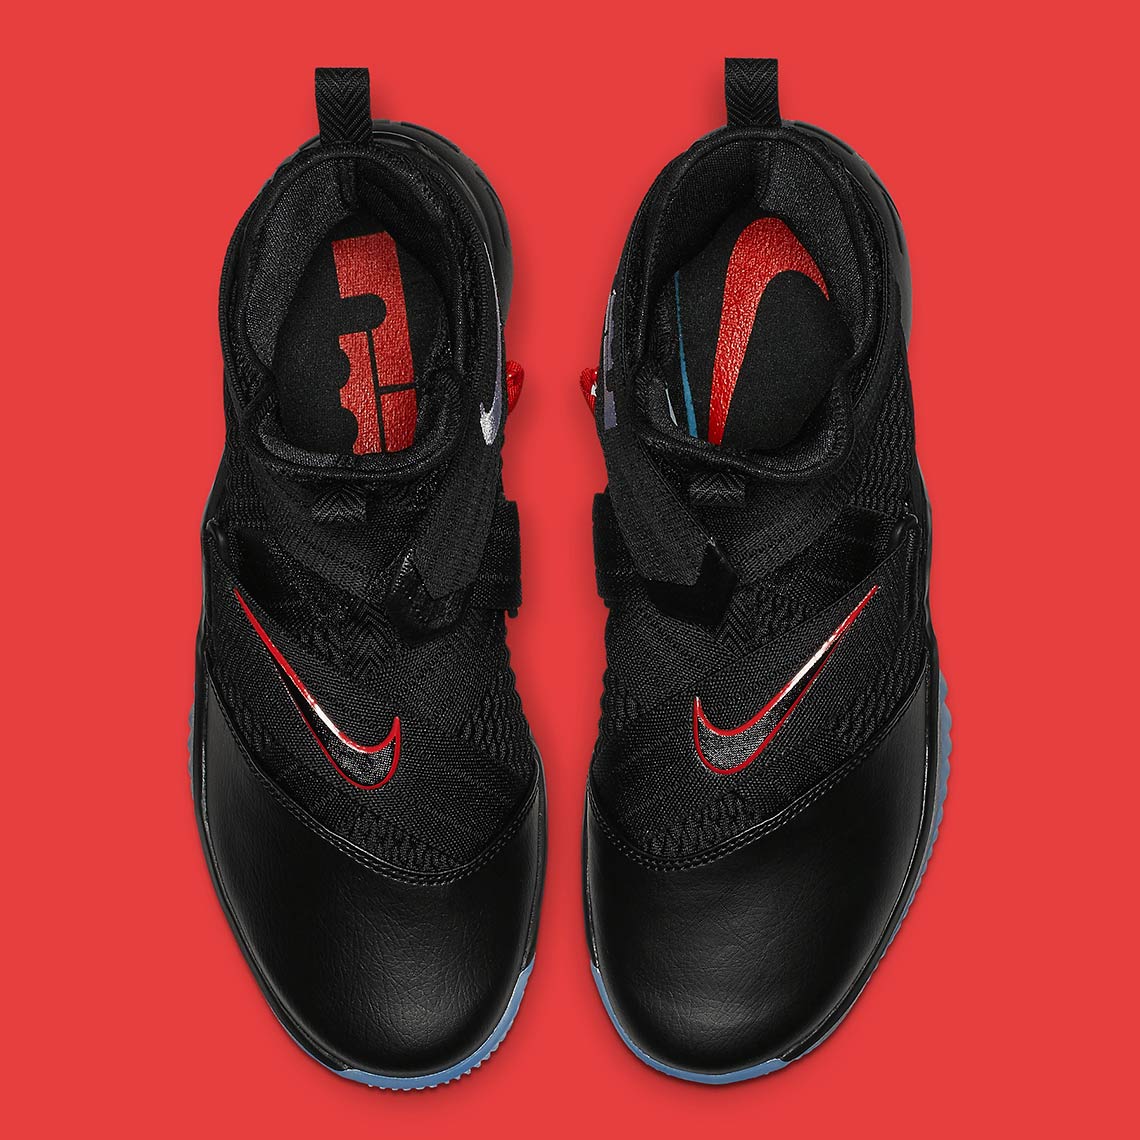 lebron soldier 12 bred